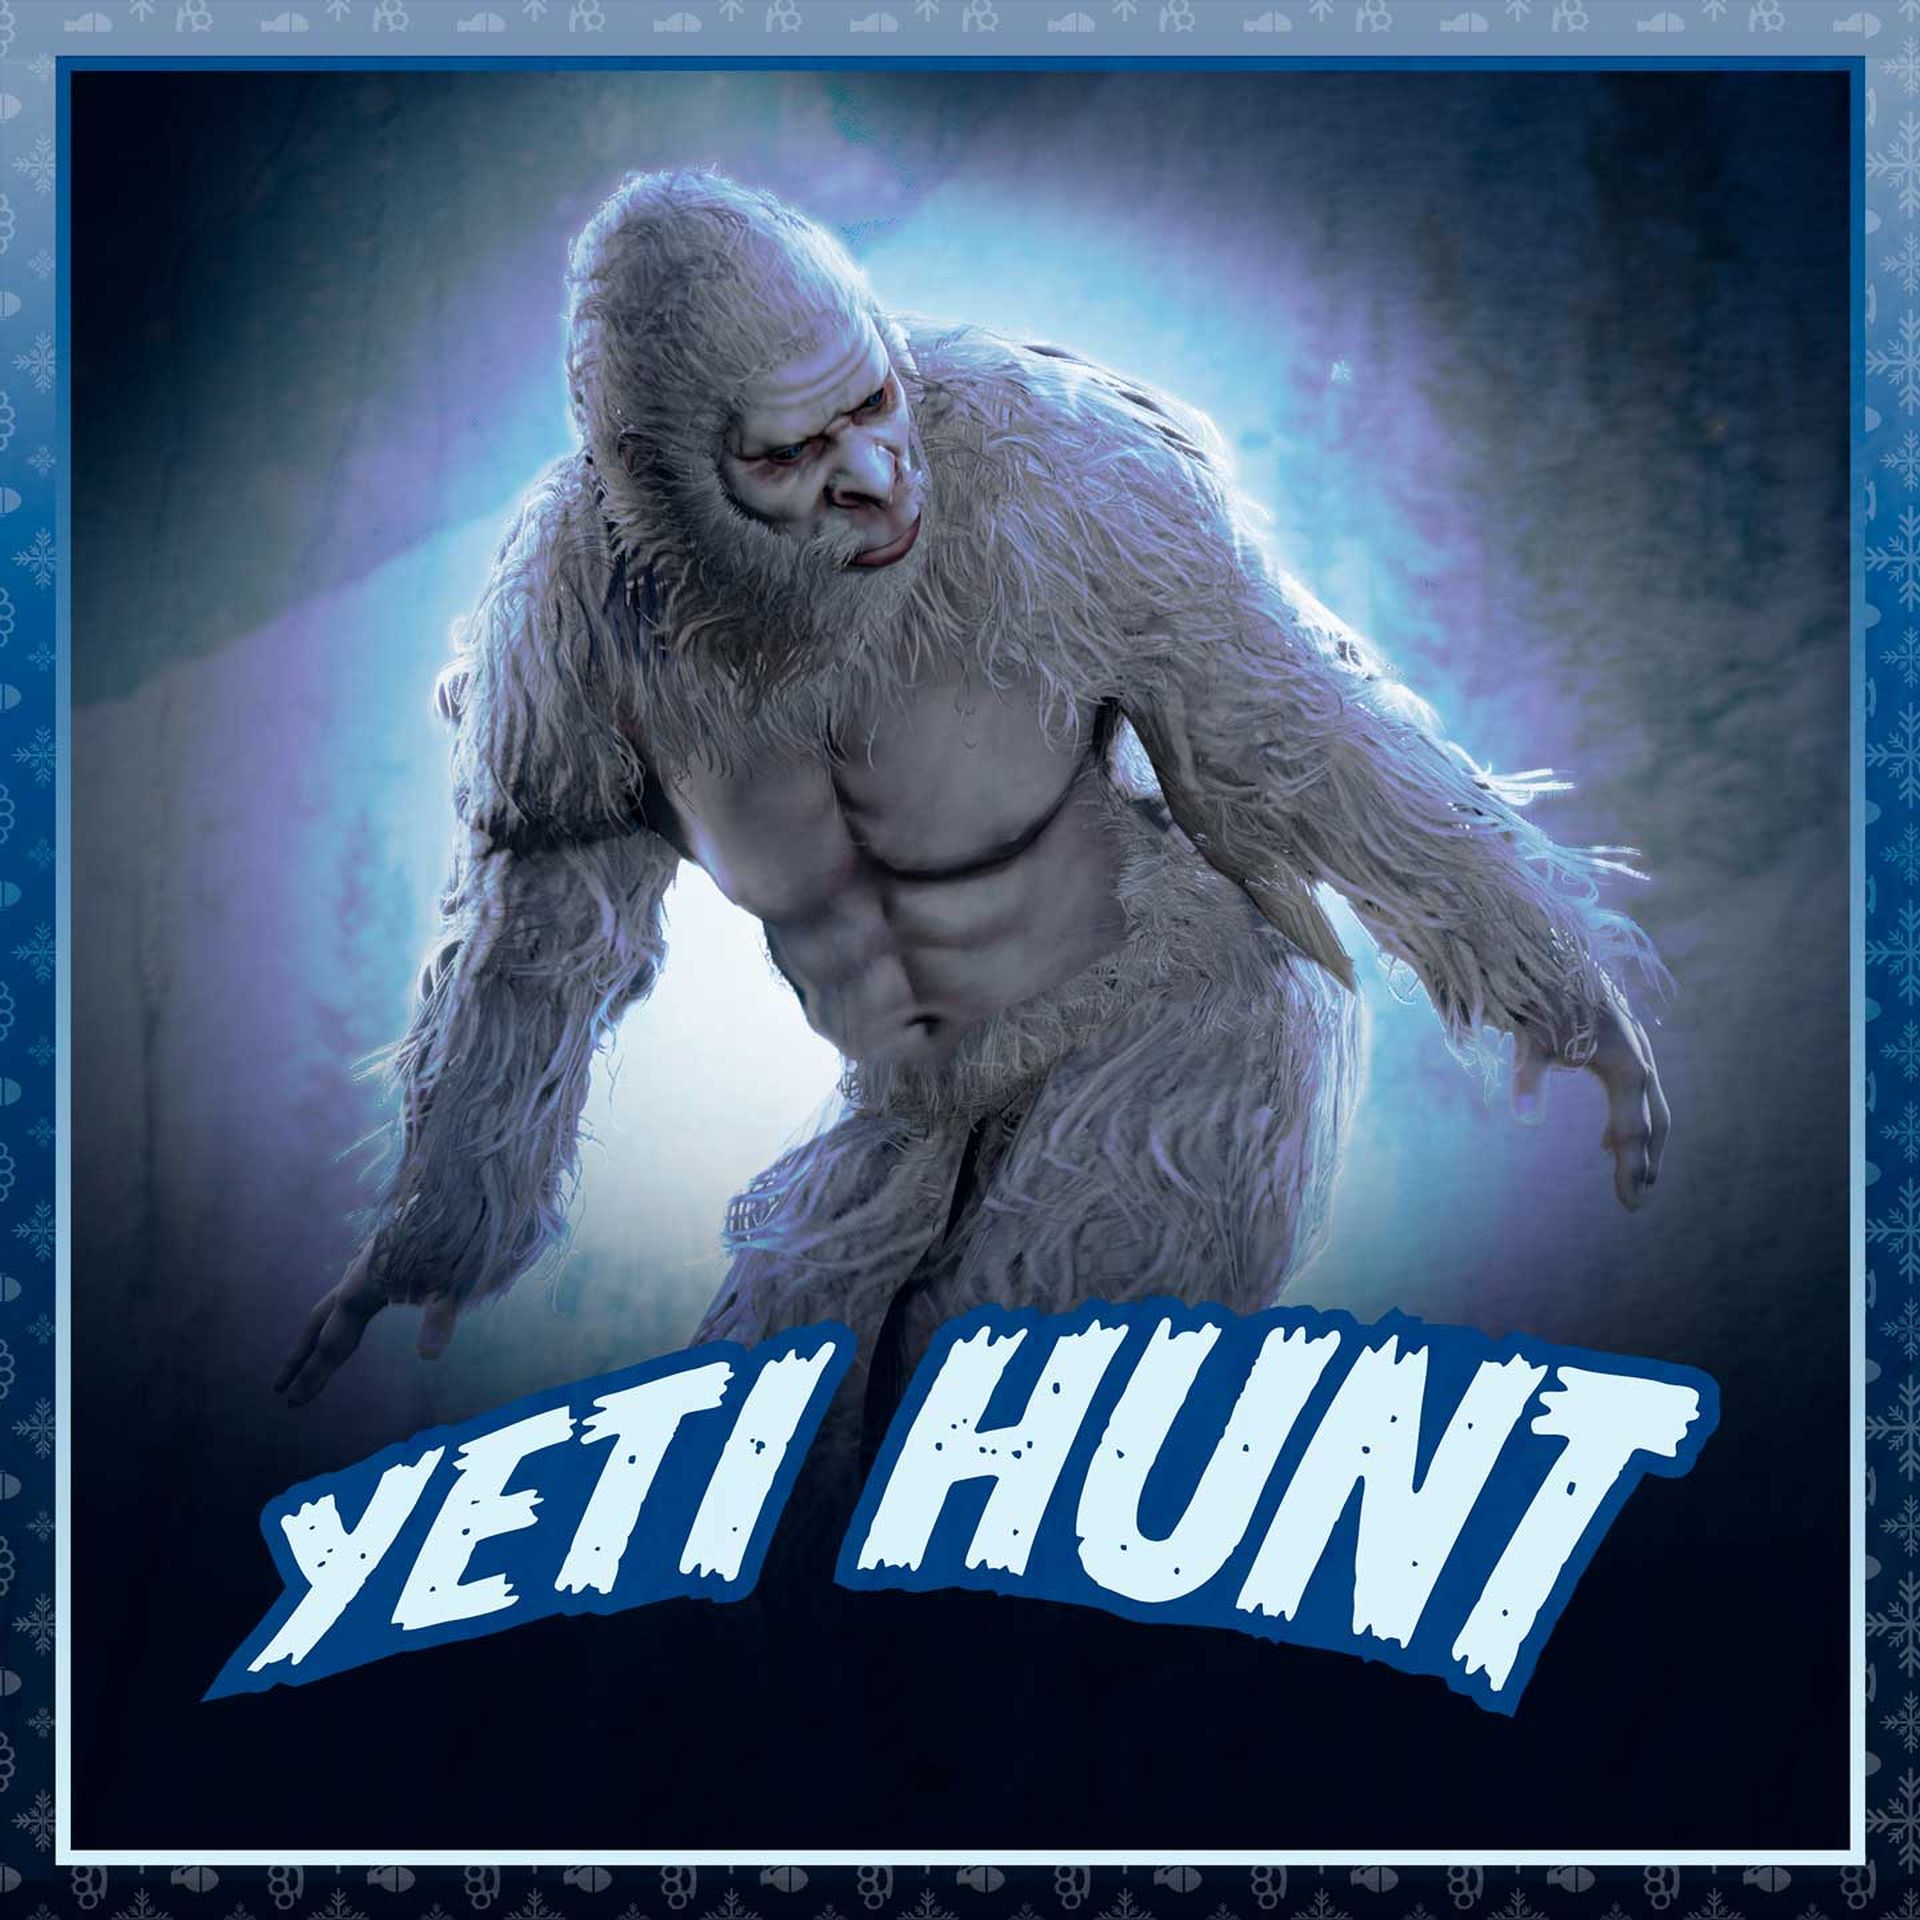 GTA 5 Online Yeti Hunt explained: Yeti Clue locations and more